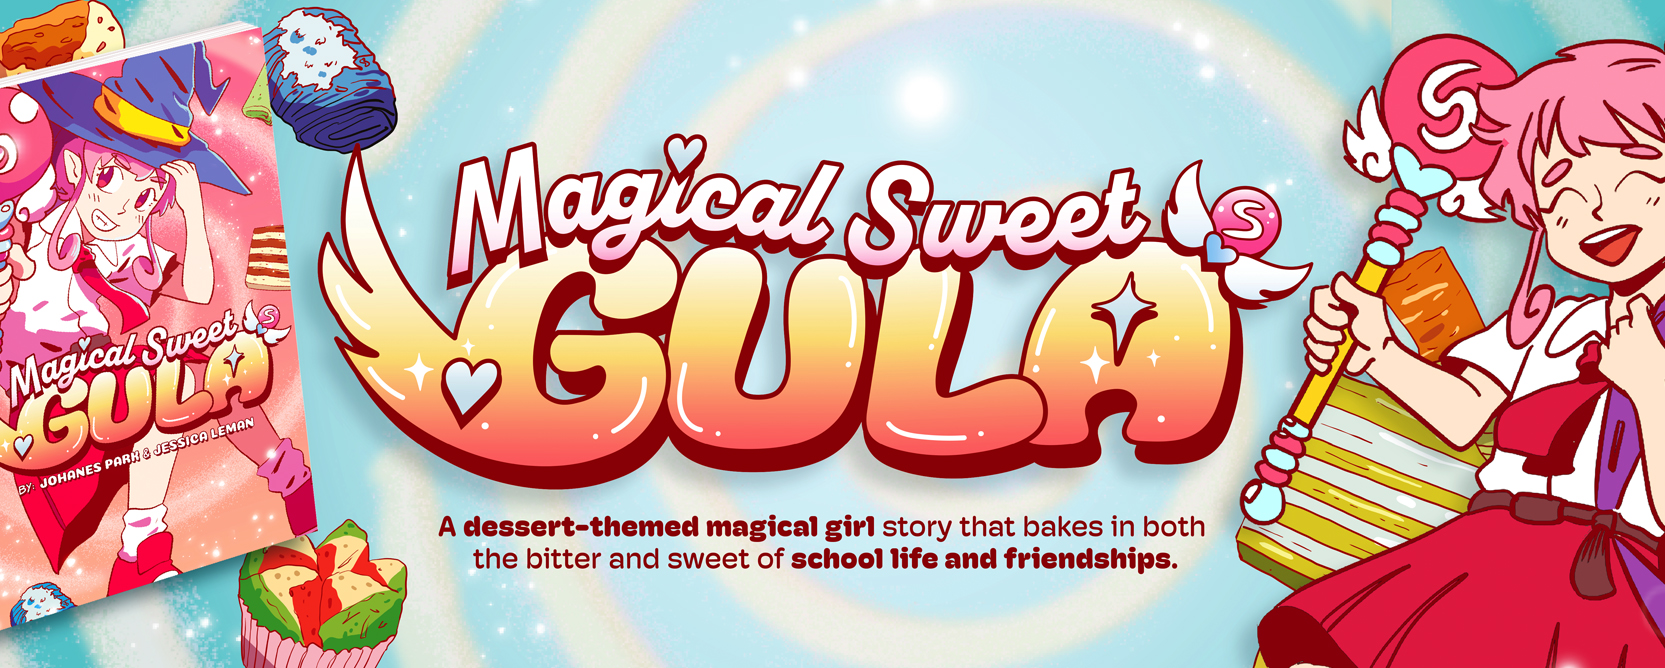 Magical Sweet Gula: Gula Gulali discovers that variety is not the spice of life at school where her magic makes for sour grapes